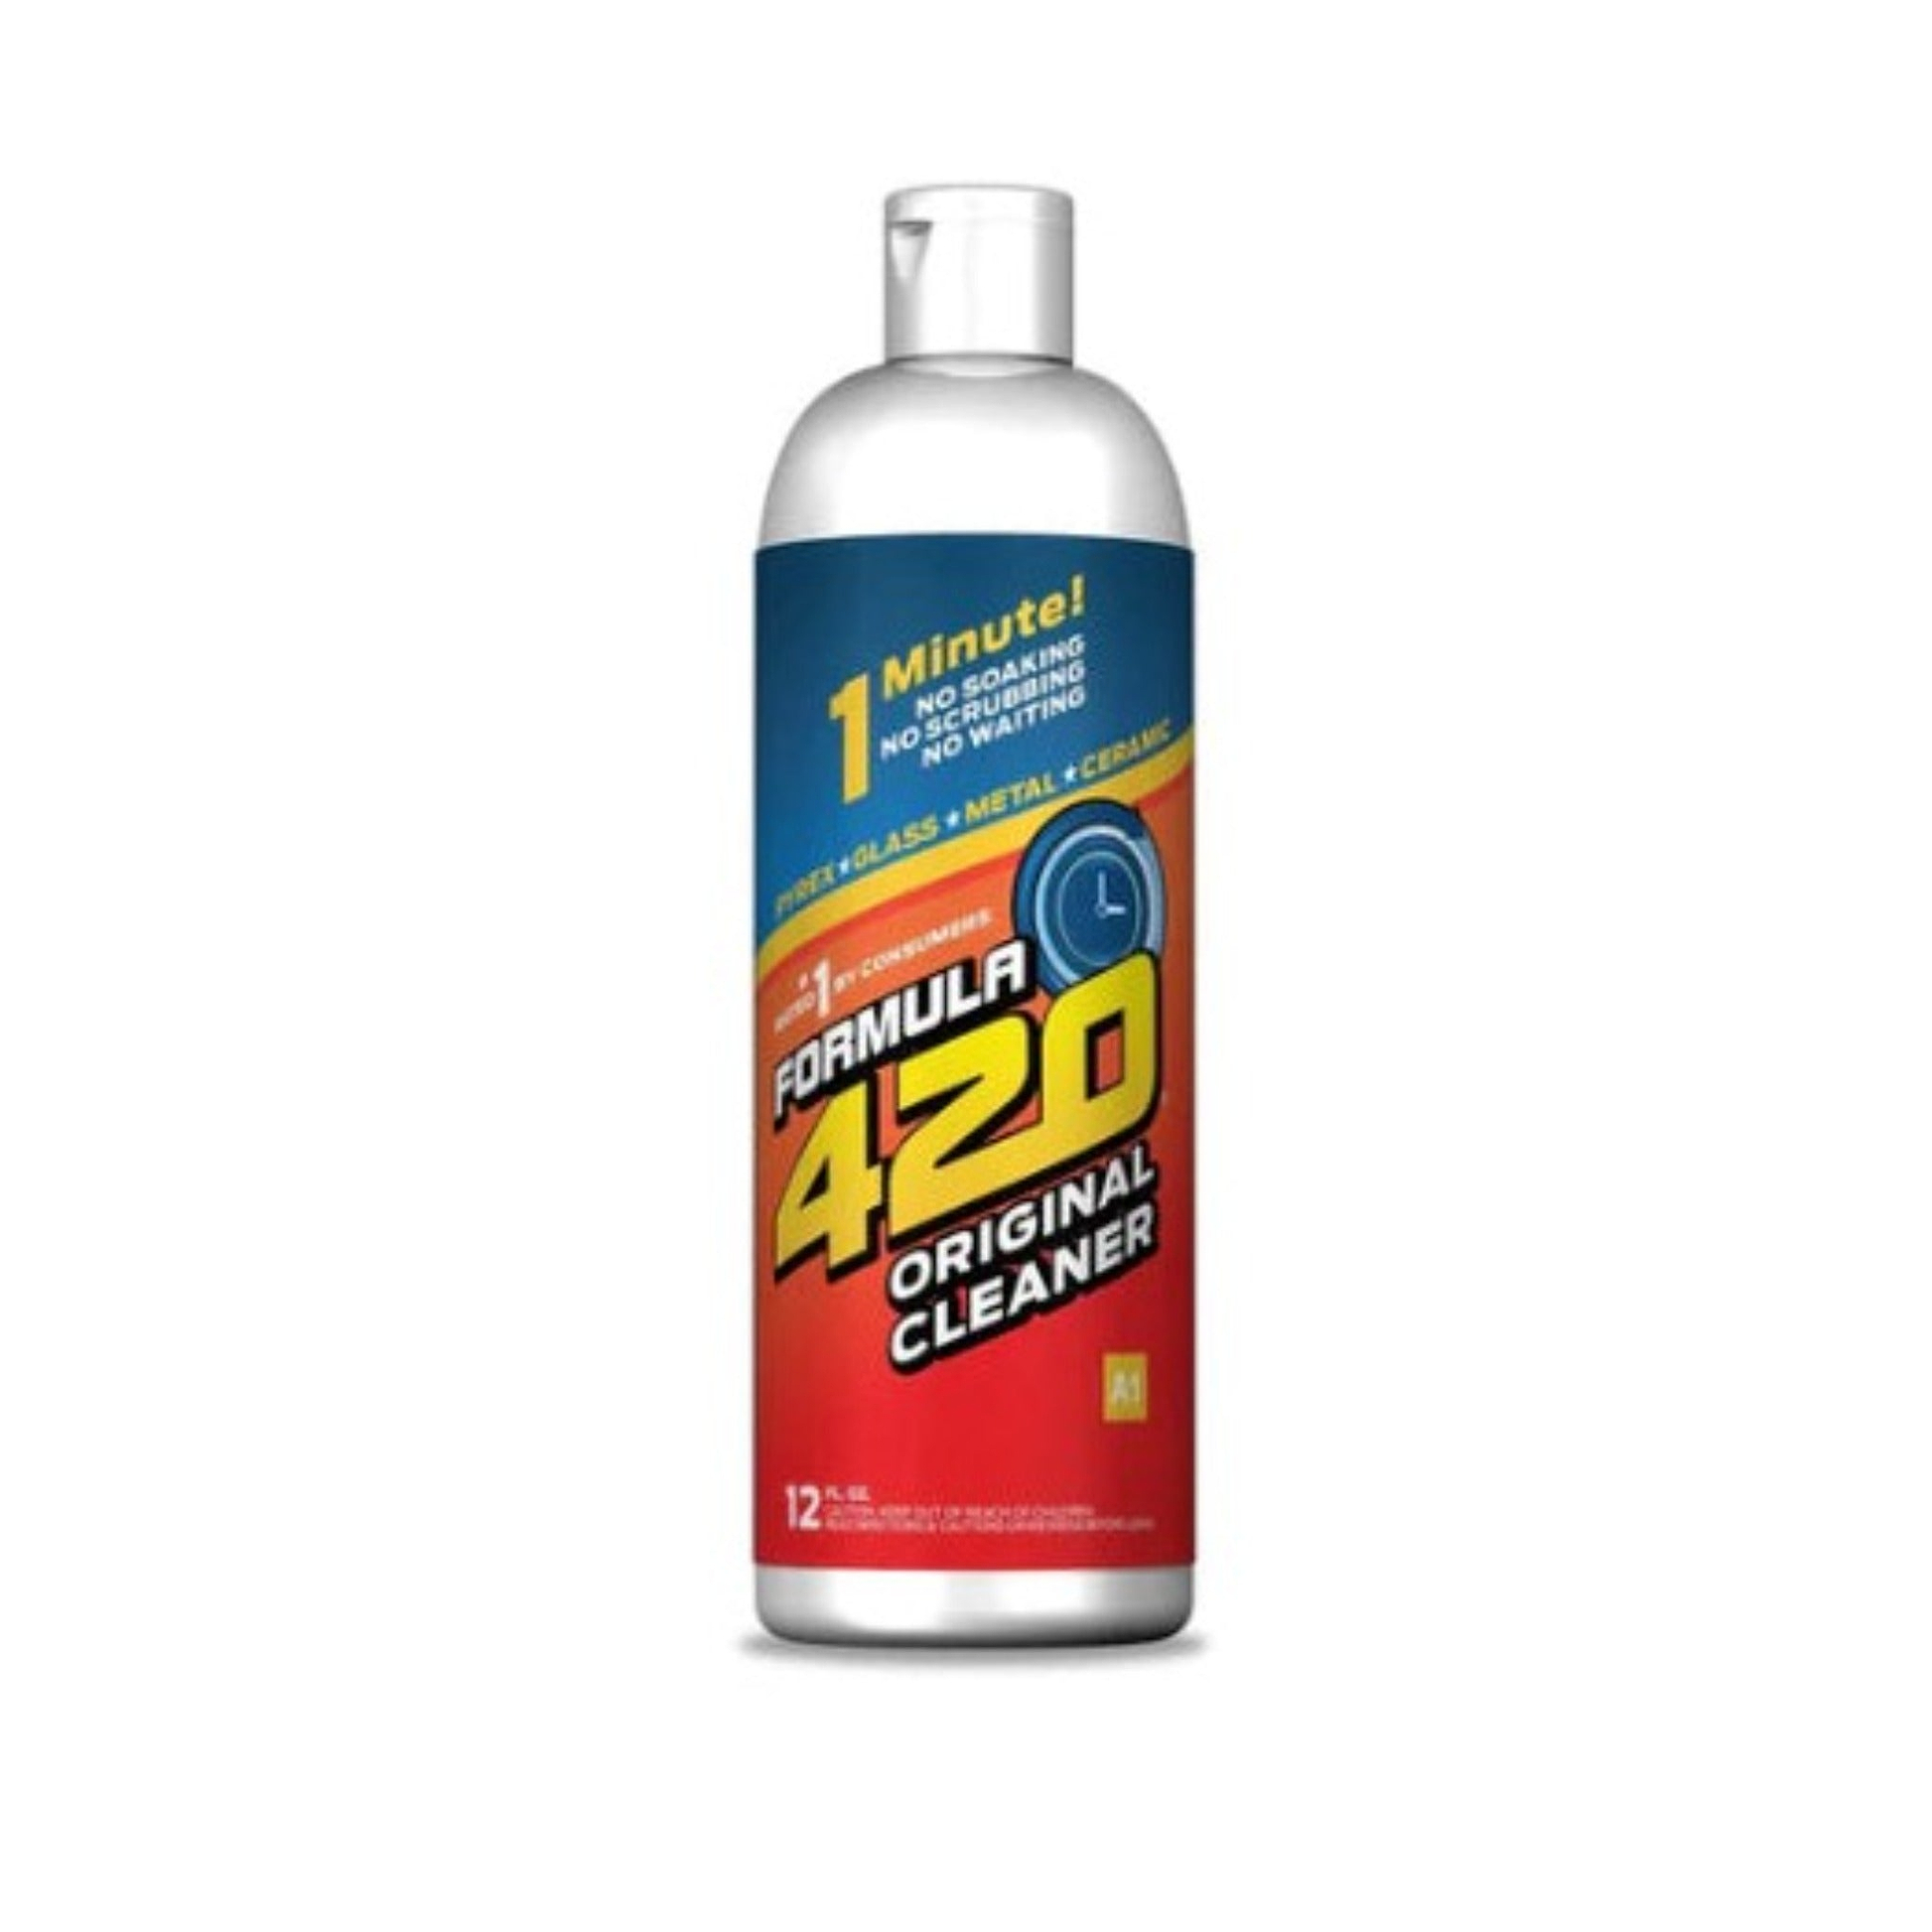 Formula 420 All Purpose Cleaner - Everything 420